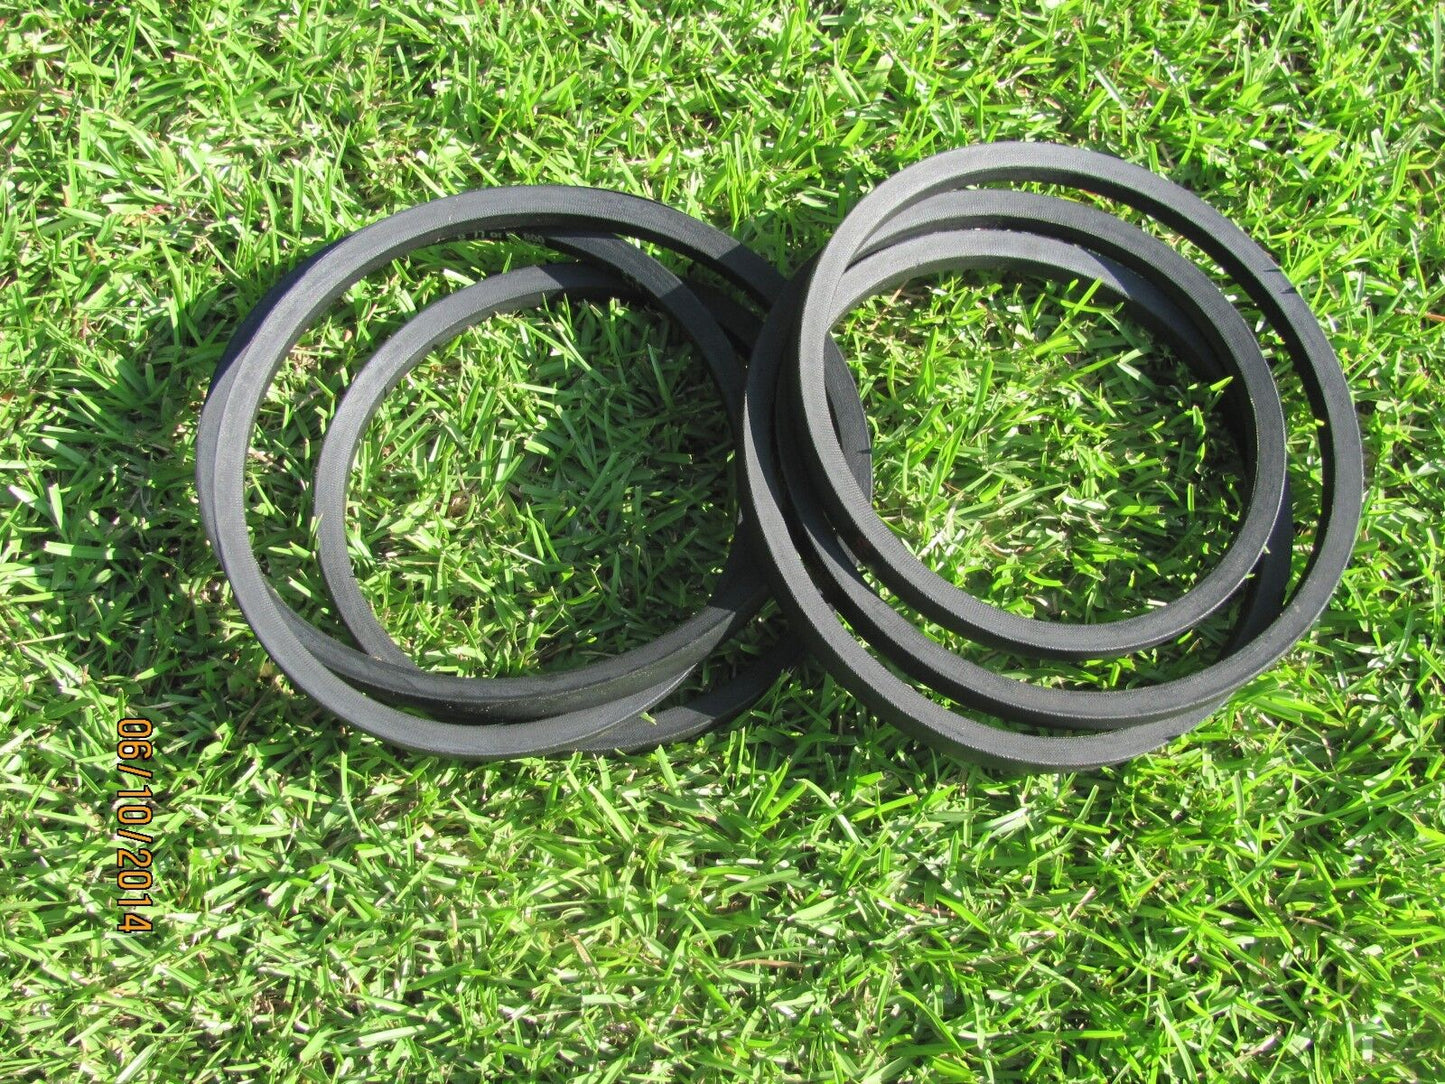 2 REPLACEMENT BELTS FOR SERVIS RHINO BREEZE 60" MOWER RHINO 00775054 MATCHED SET